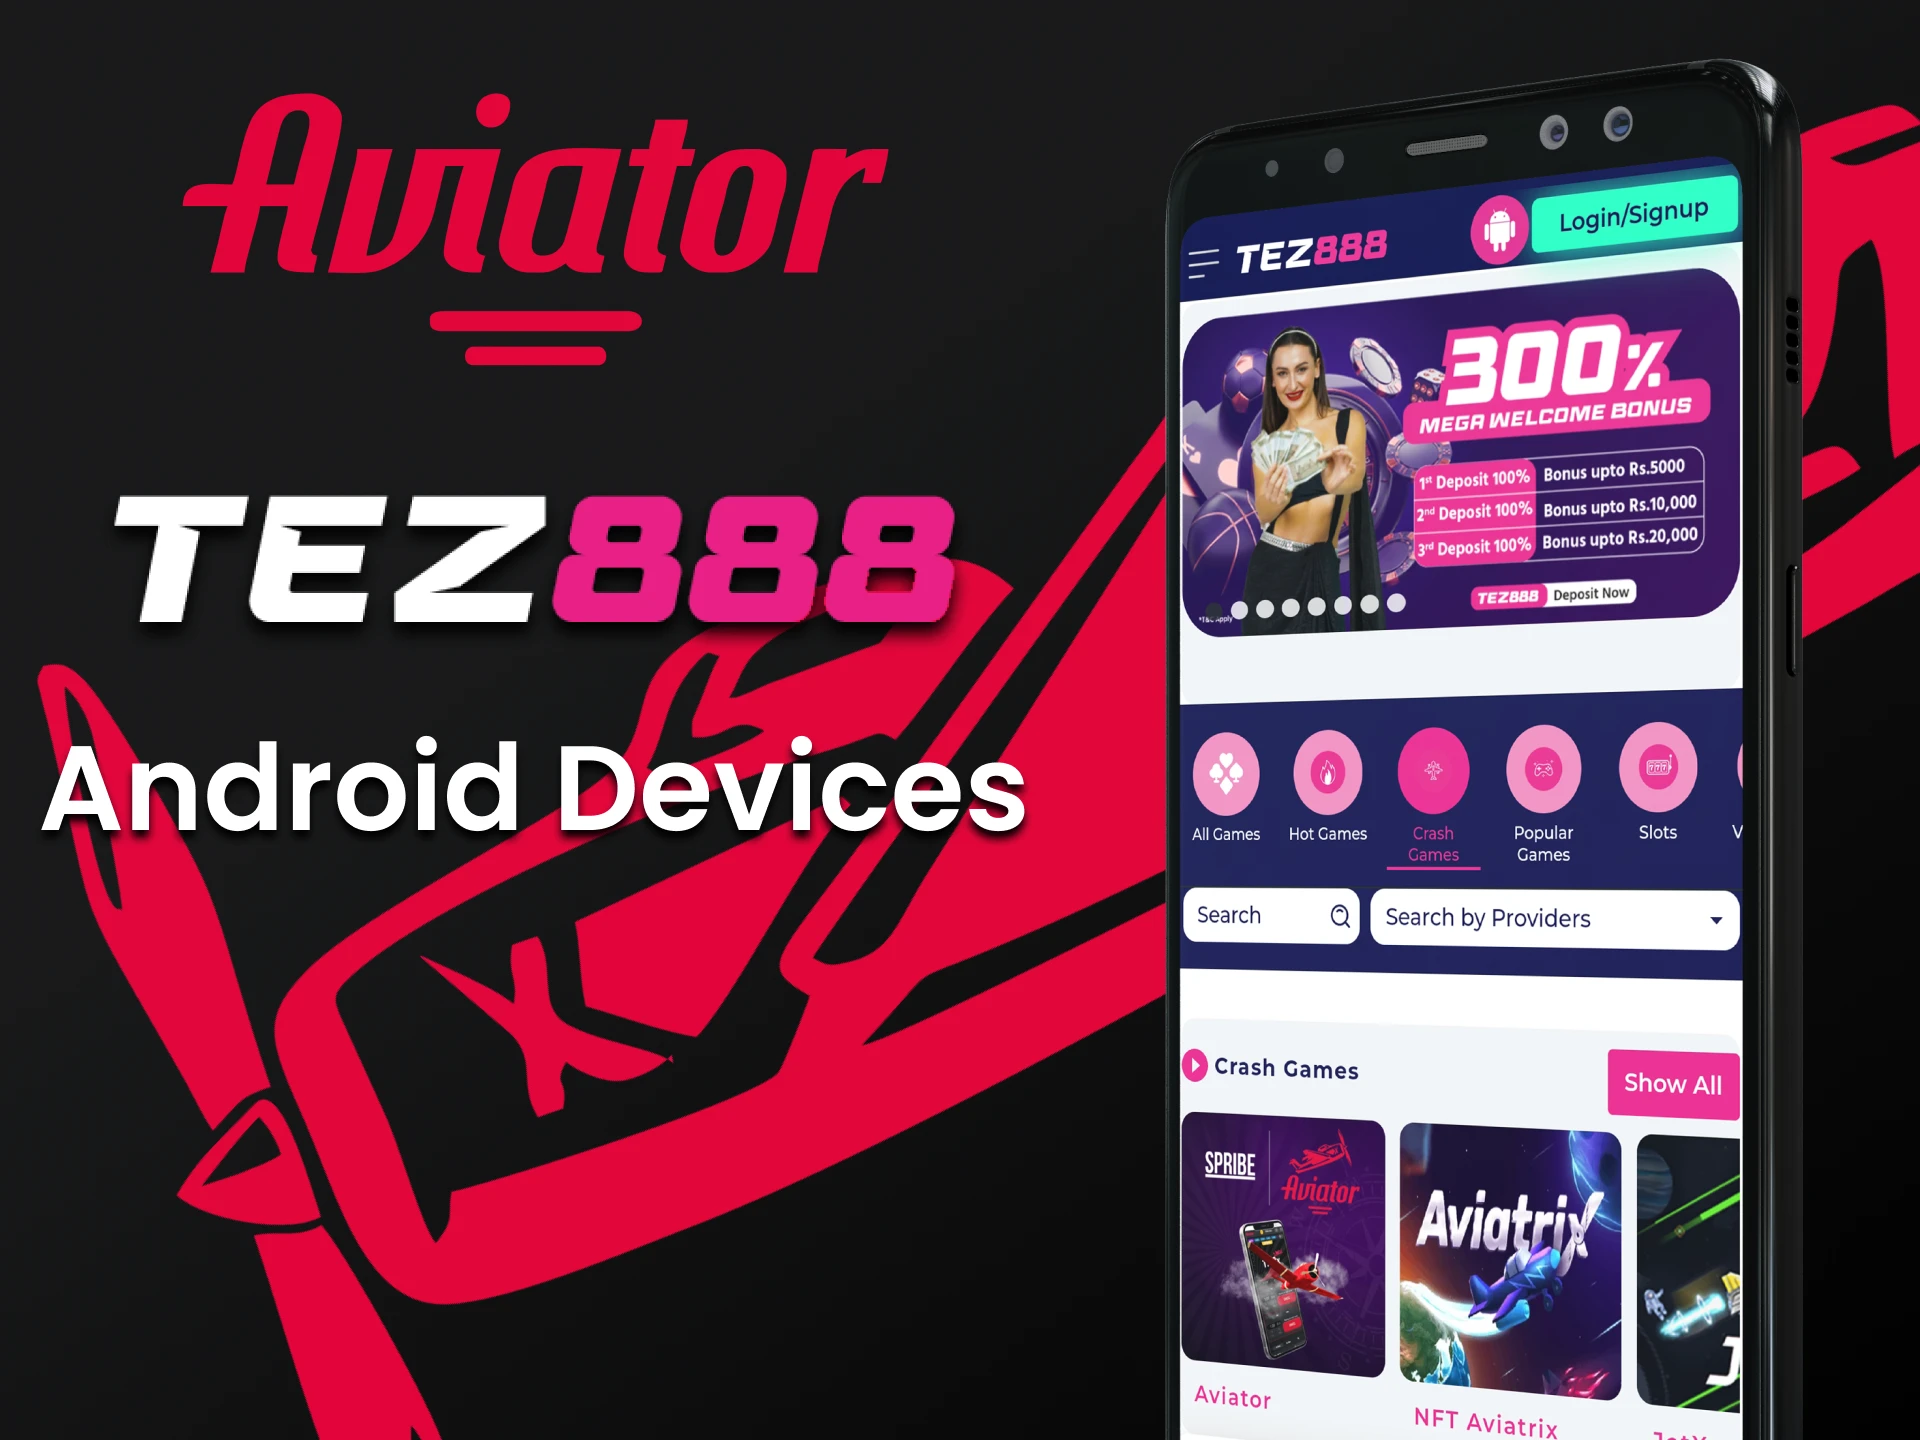 Install the Tez888 application for Android devices.